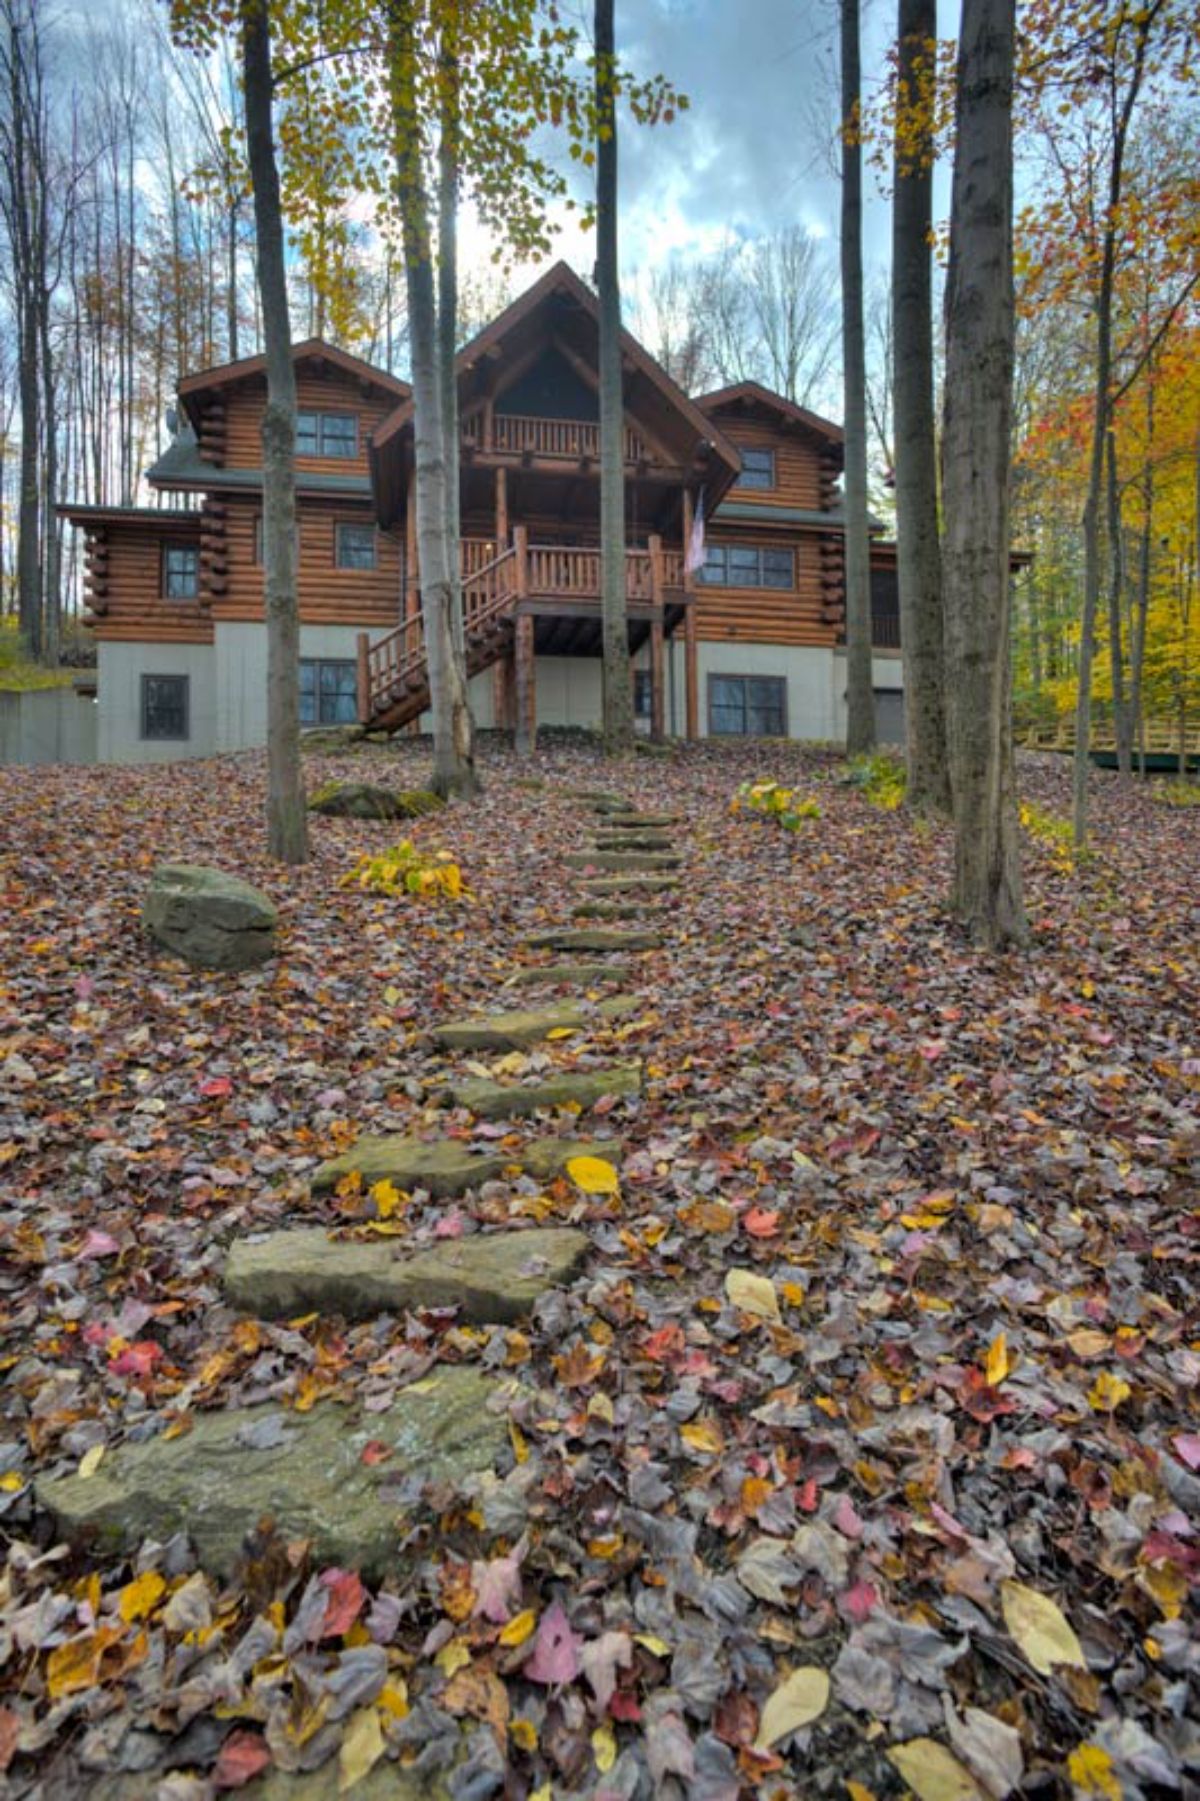 stone path up to back of log cabin with green roof and walkout basement